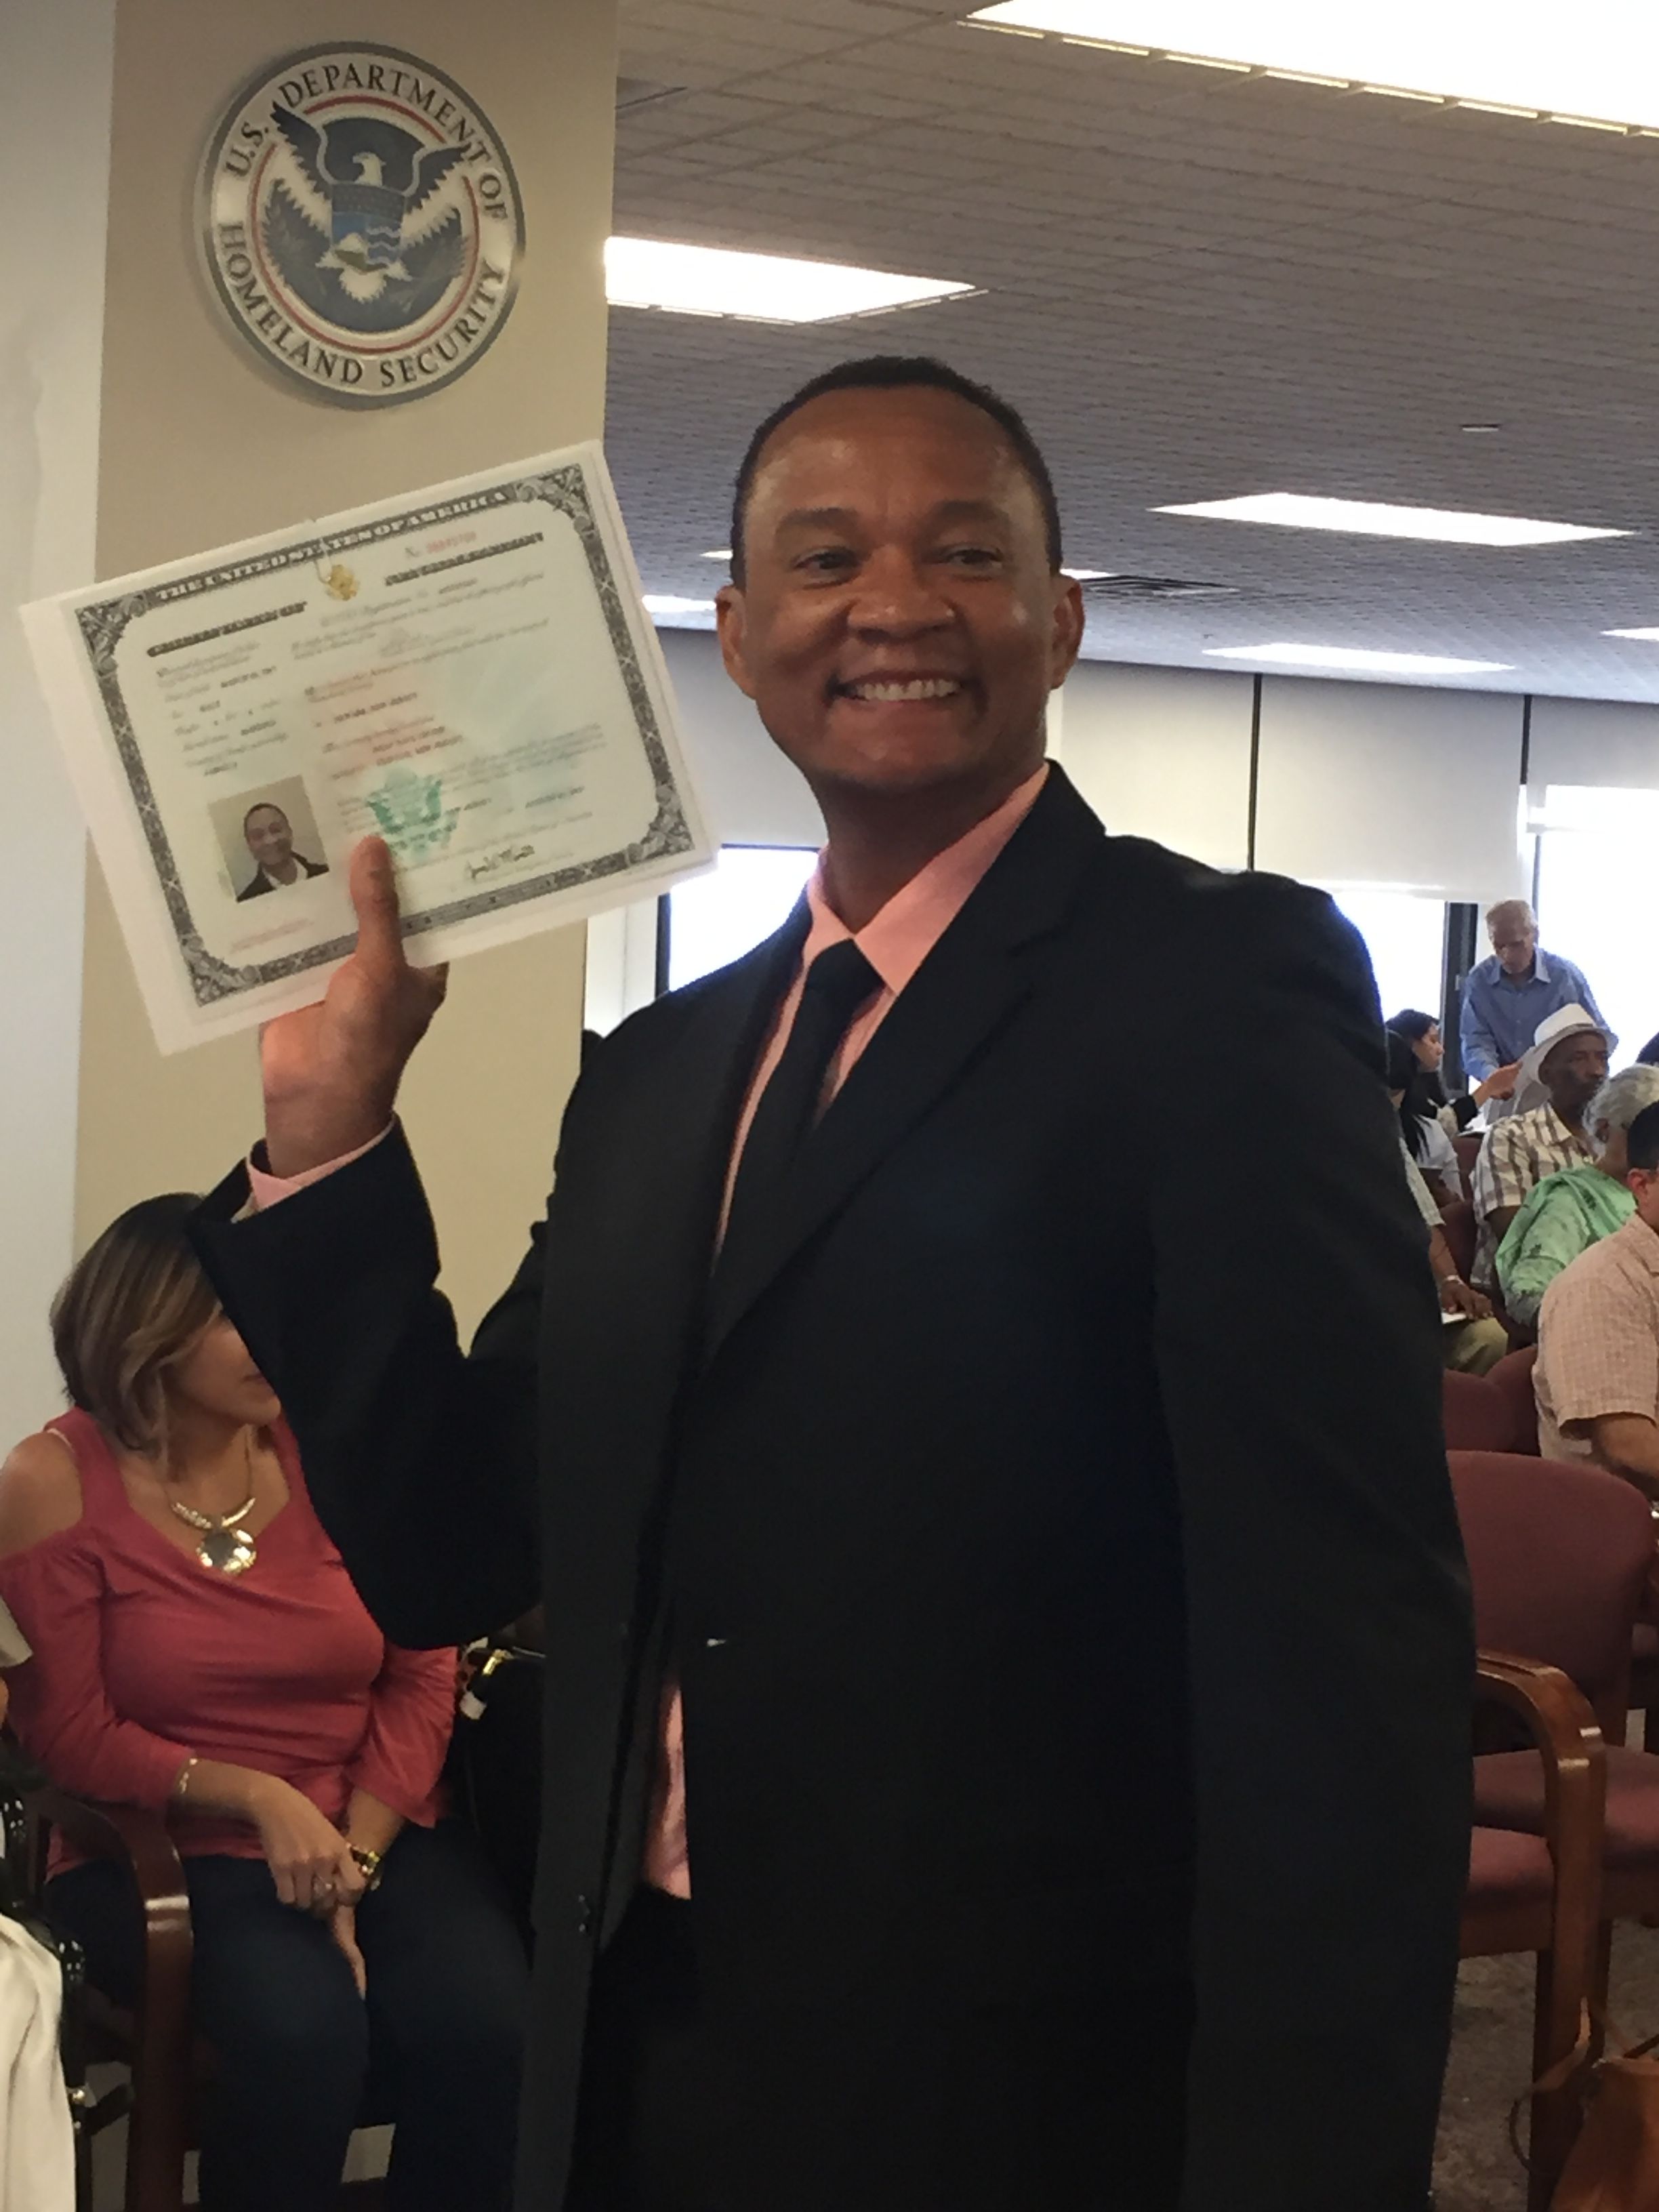 Dean receiving his citizenship after living in the US for over 25 years during 45's presidency. 2017, New Jersey